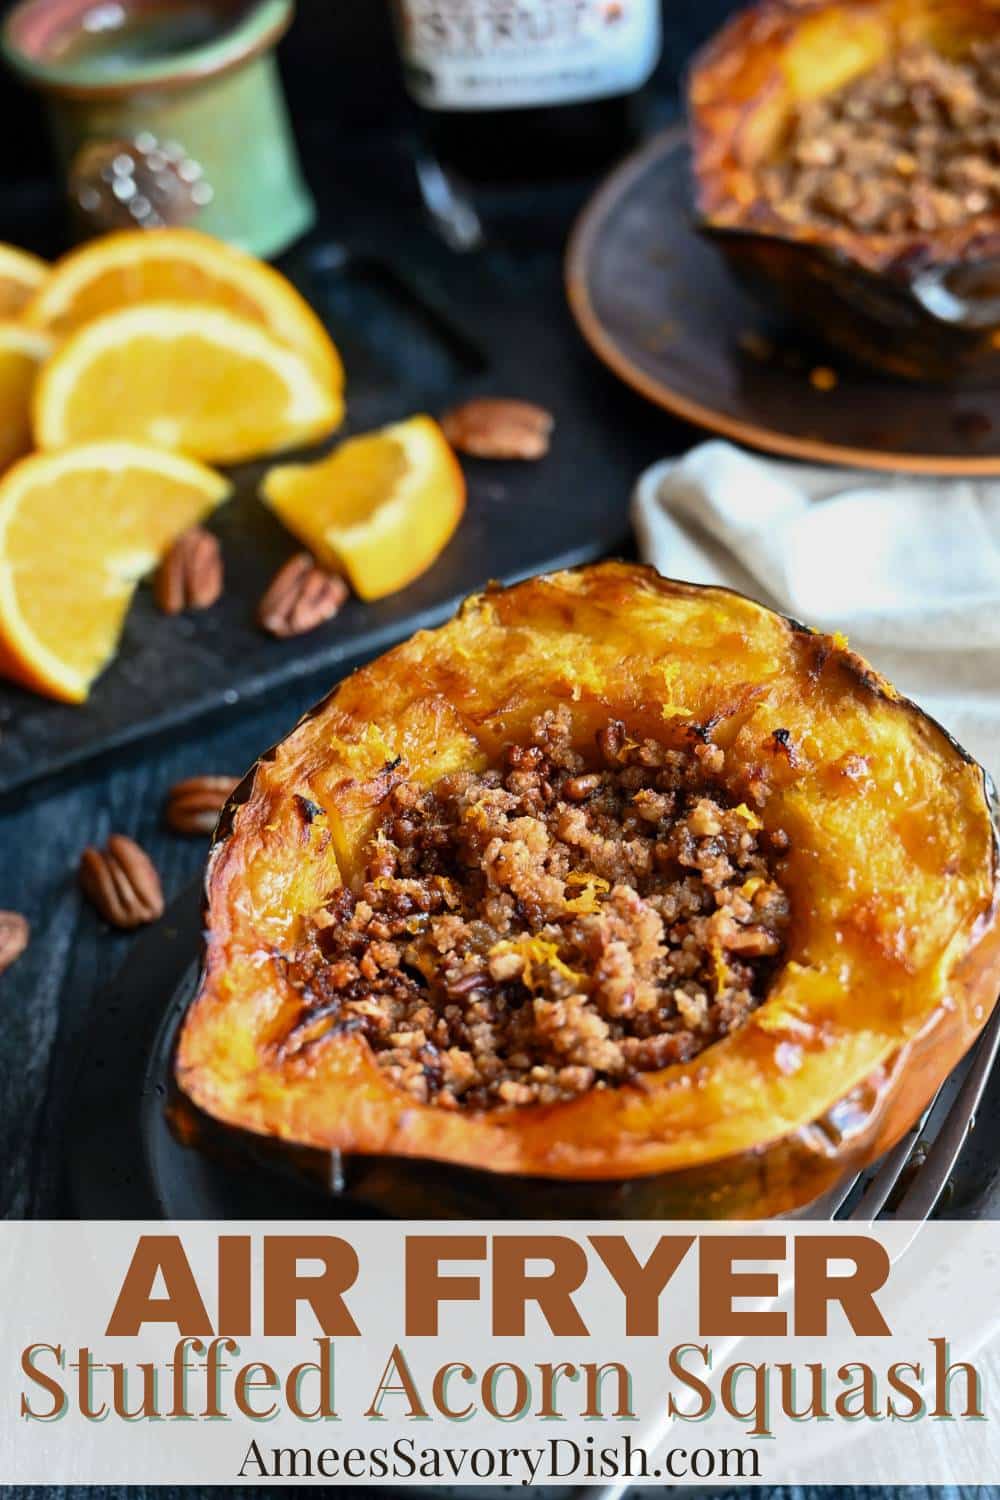 An easy-to-make side dish featuring seasonal squash stuffed with a sweet, nutty breadcrumb filling. via @Ameessavorydish